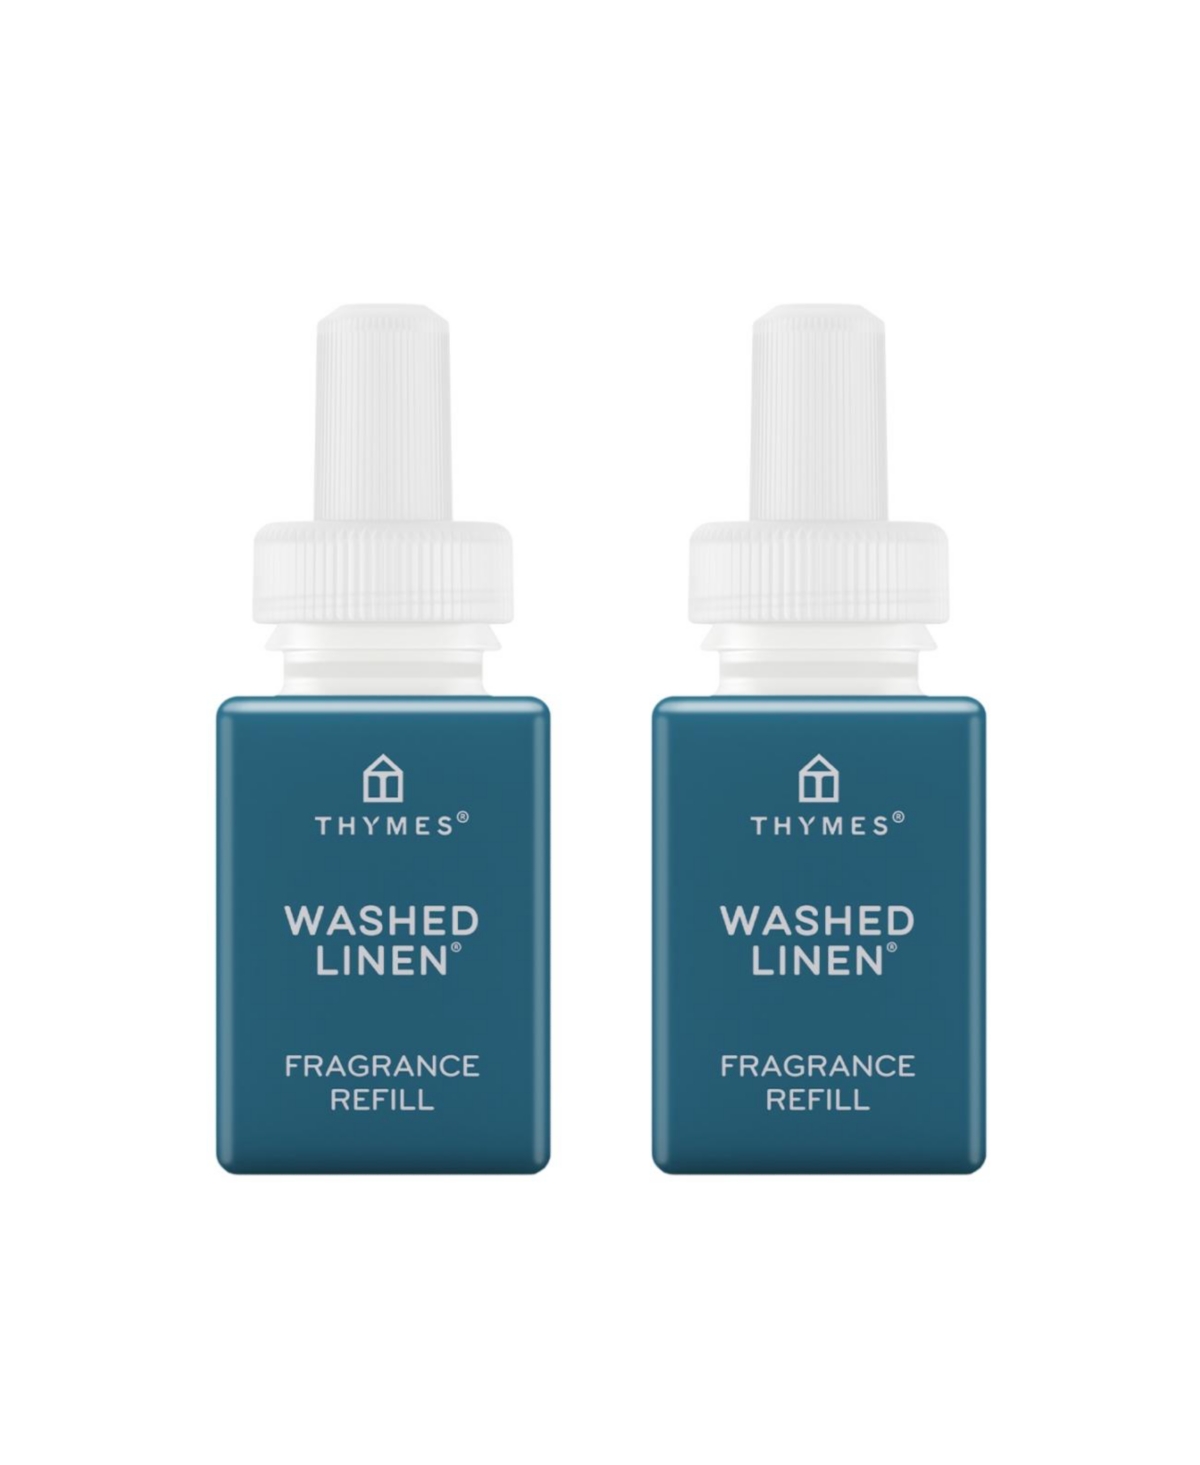 and Thymes - Washed Linen - Fragrance for Smart Home Air Diffusers - Room Freshener - Aromatherapy Scents for Bedrooms & Living Rooms - 2 Pack